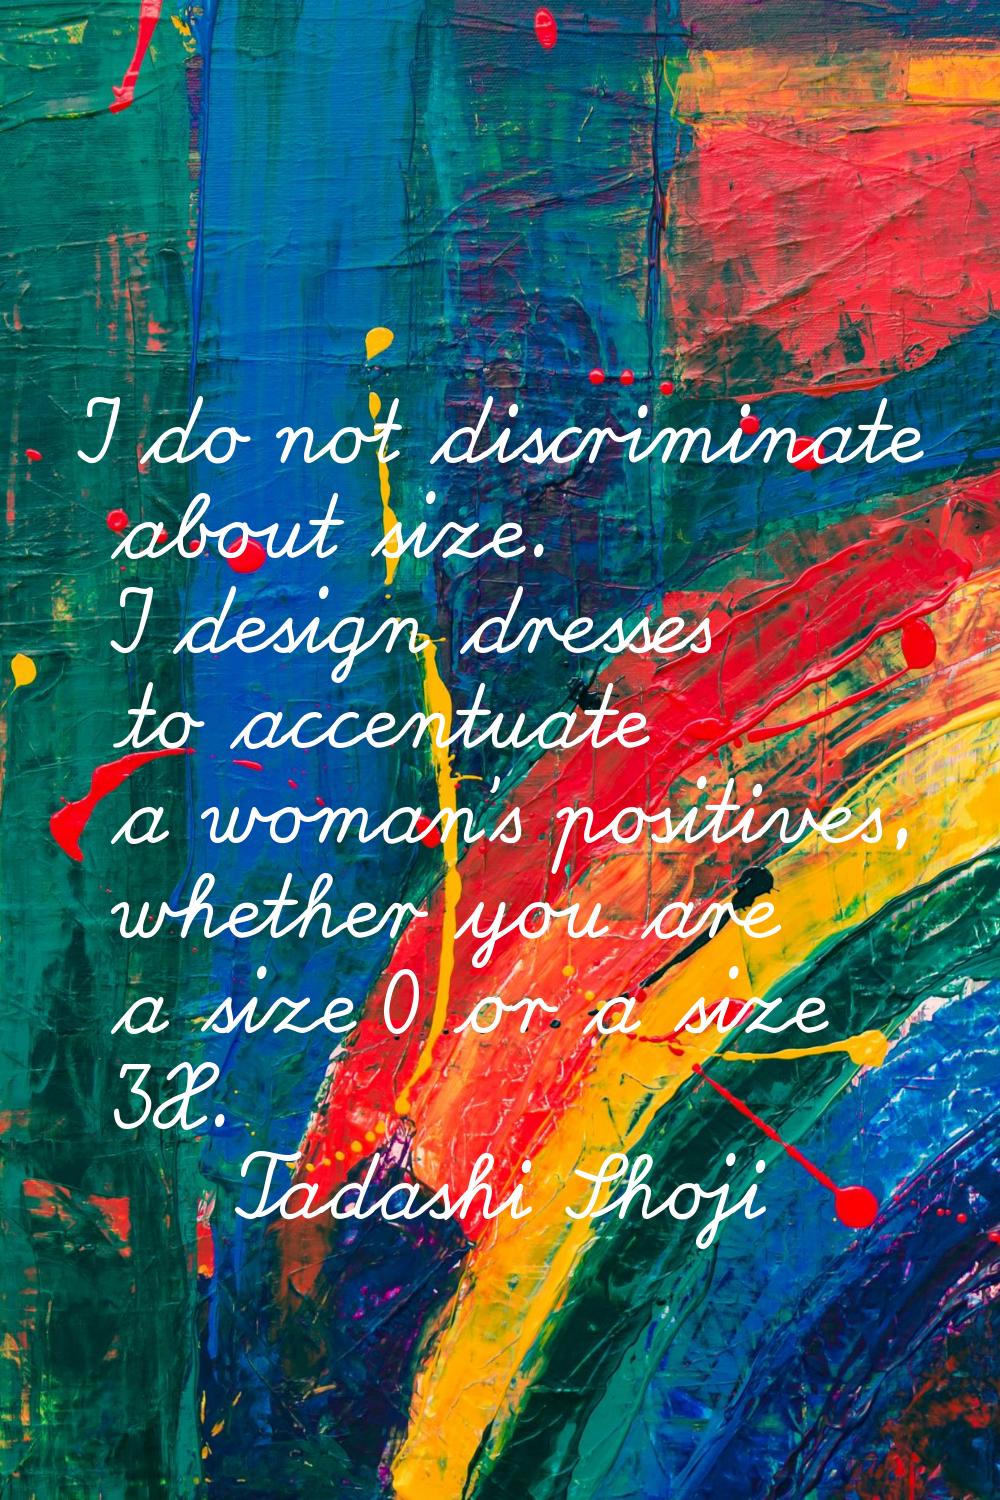 I do not discriminate about size. I design dresses to accentuate a woman's positives, whether you a